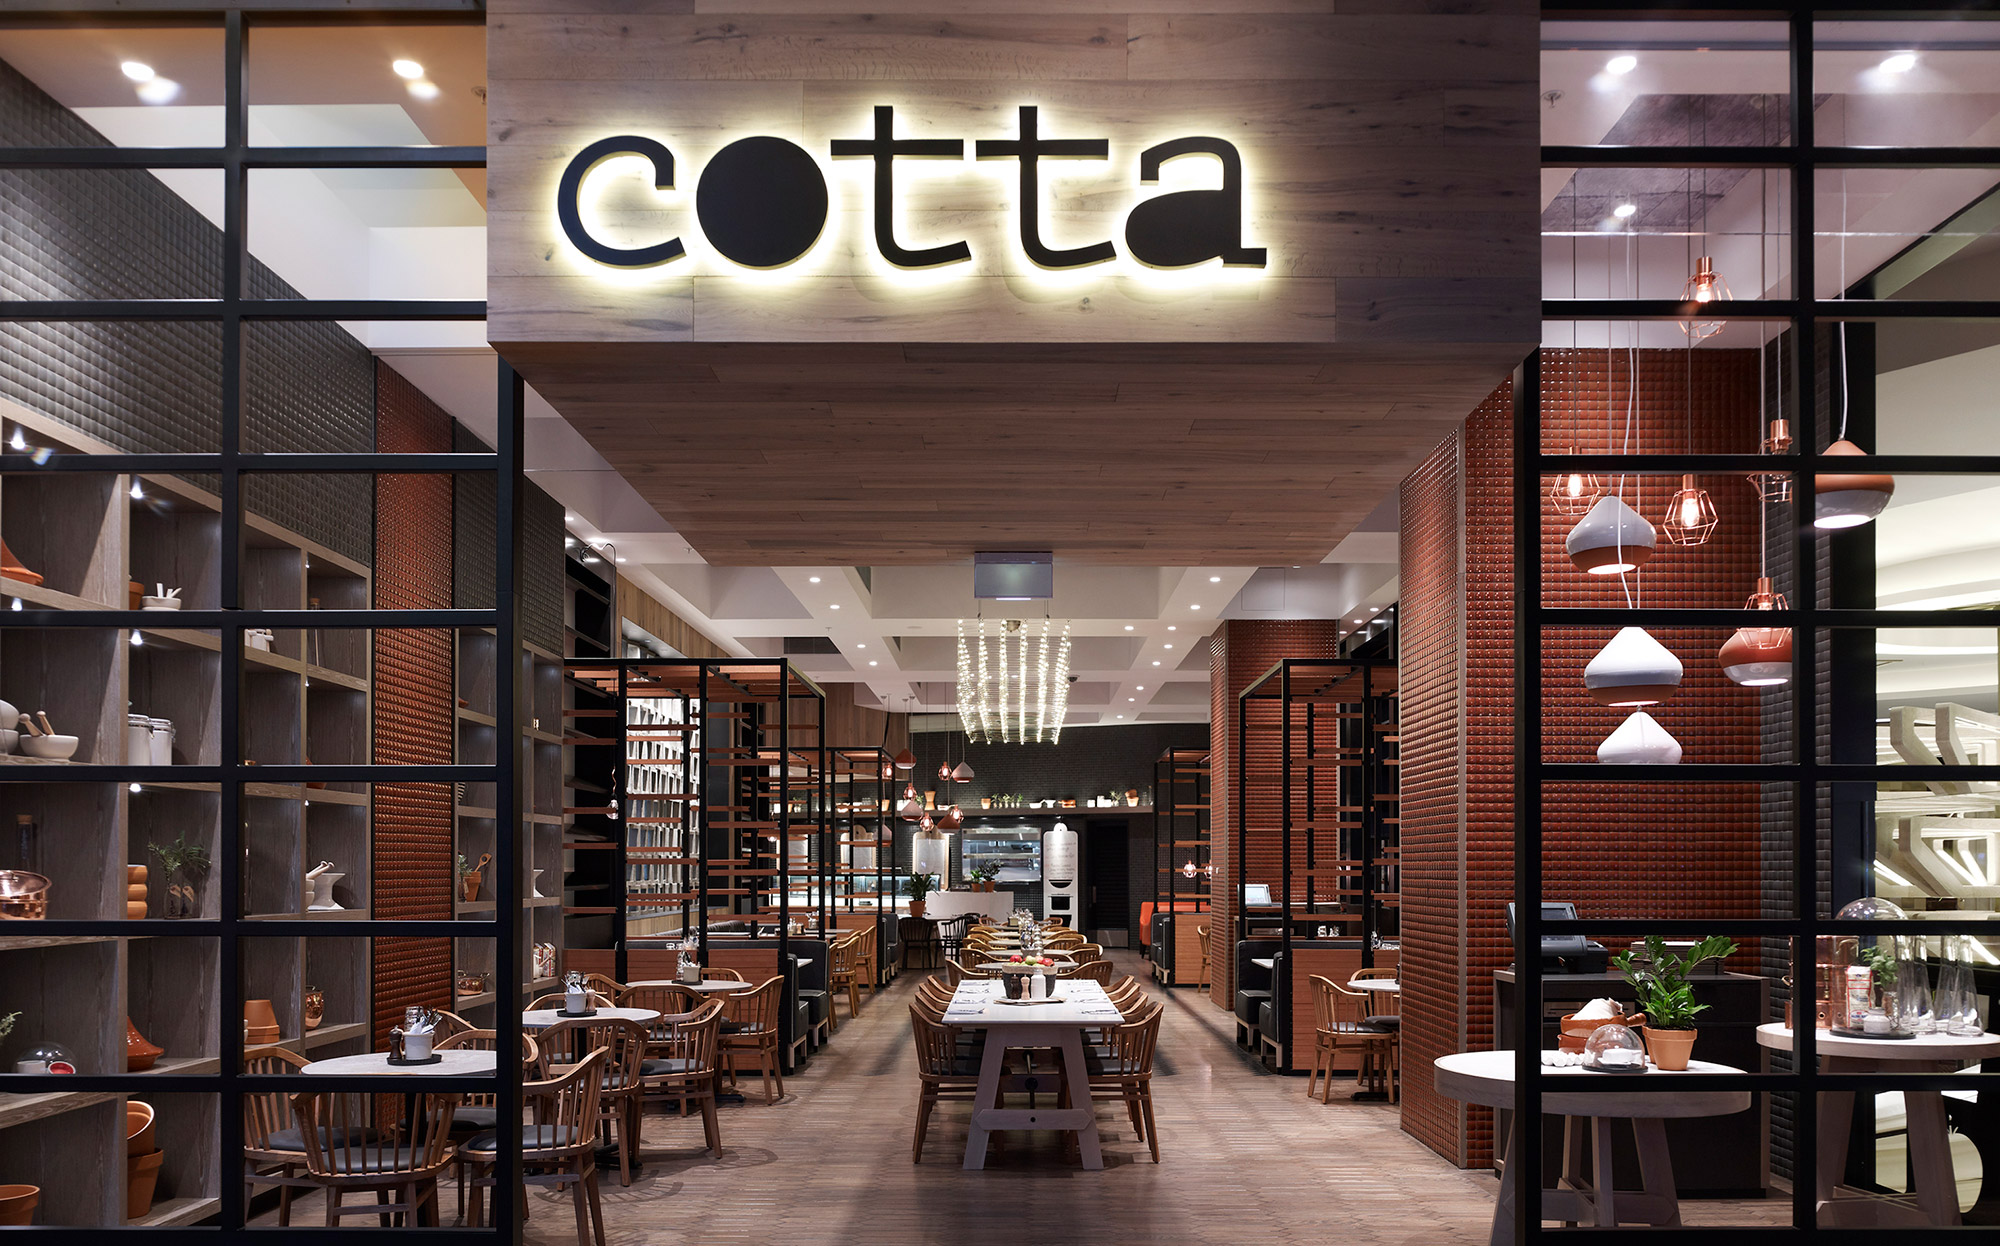 Cotta - Project by Mim Design